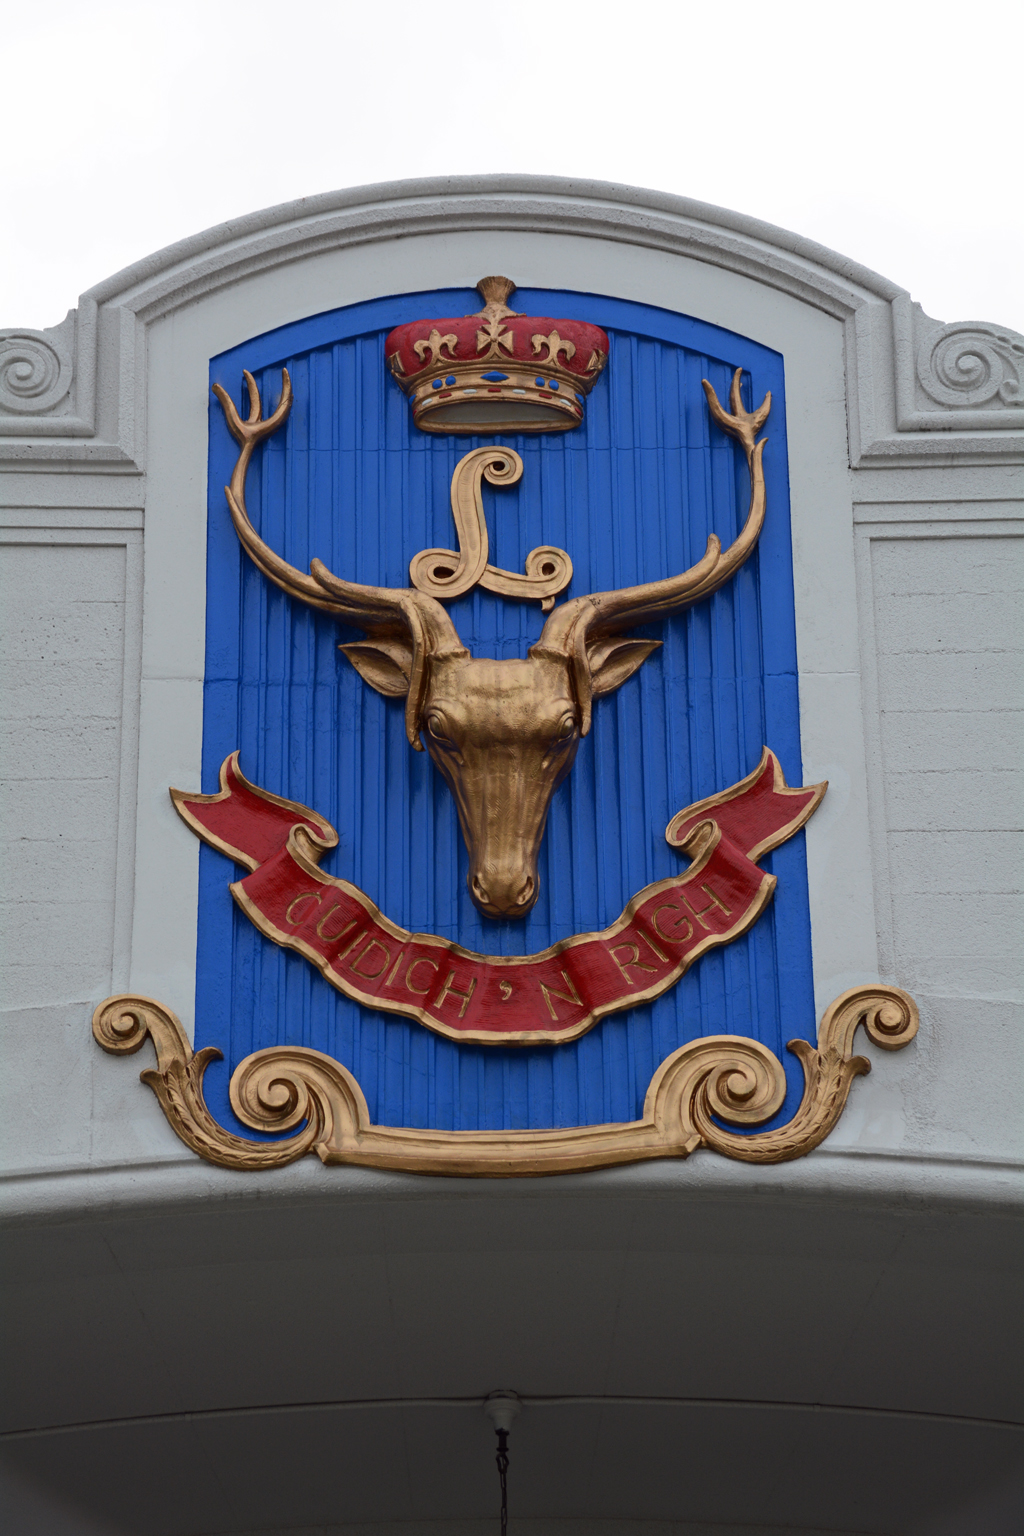 Seaforth Highlanders of Canada crest on the front of the Seaforth Armoury. 